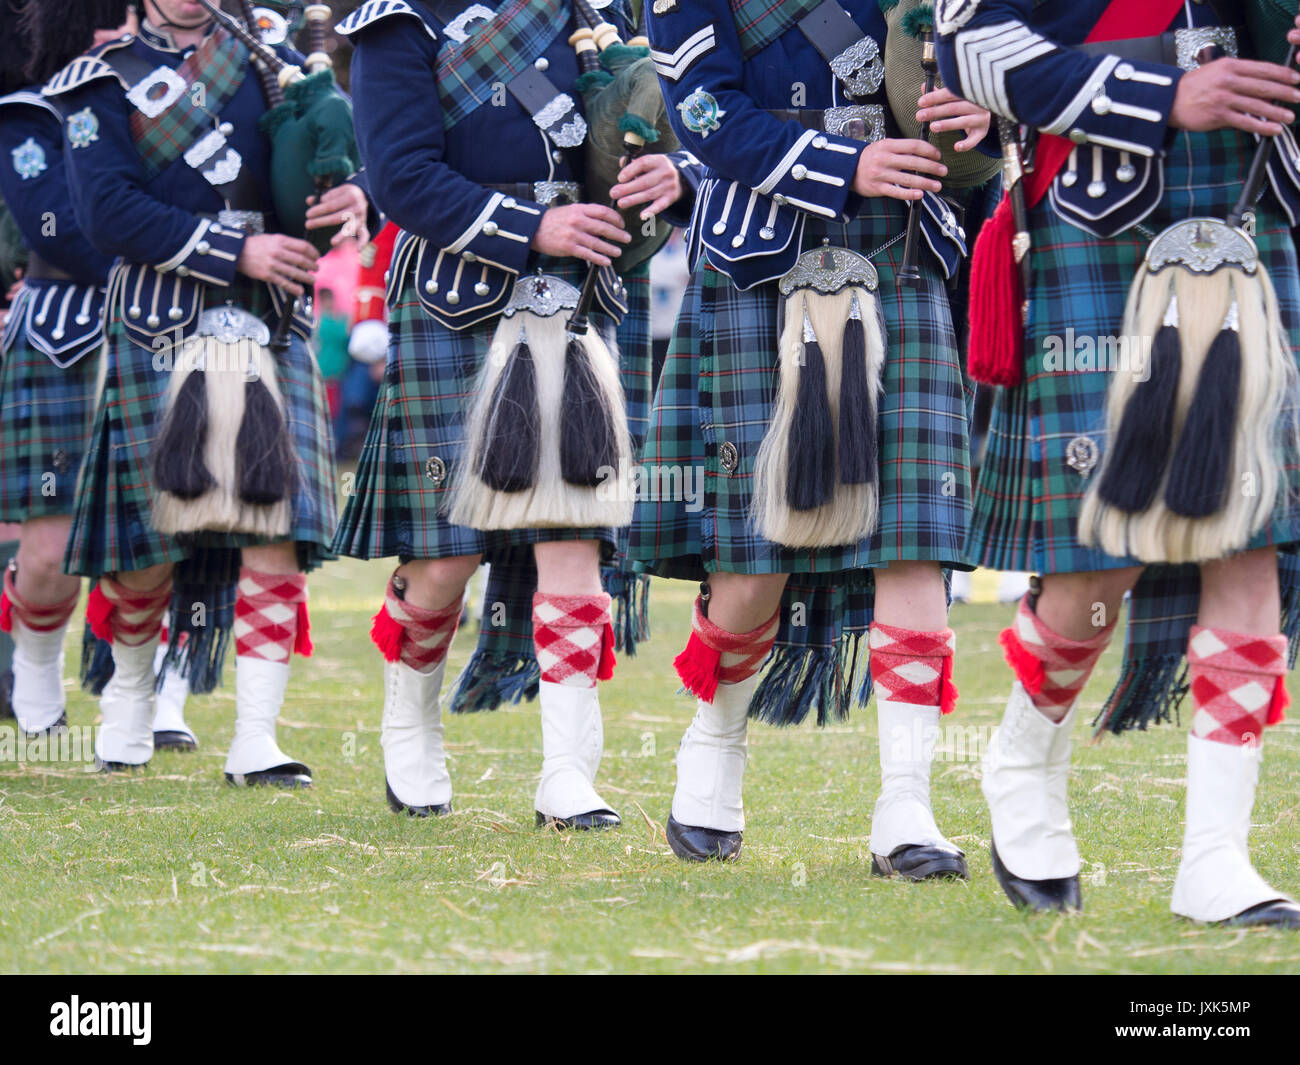 Ballater, Scotland - August 10th, 2017: The Ballater Pipe Band 'Beating the Retreat' in the town square after the Highland Games. Stock Photo